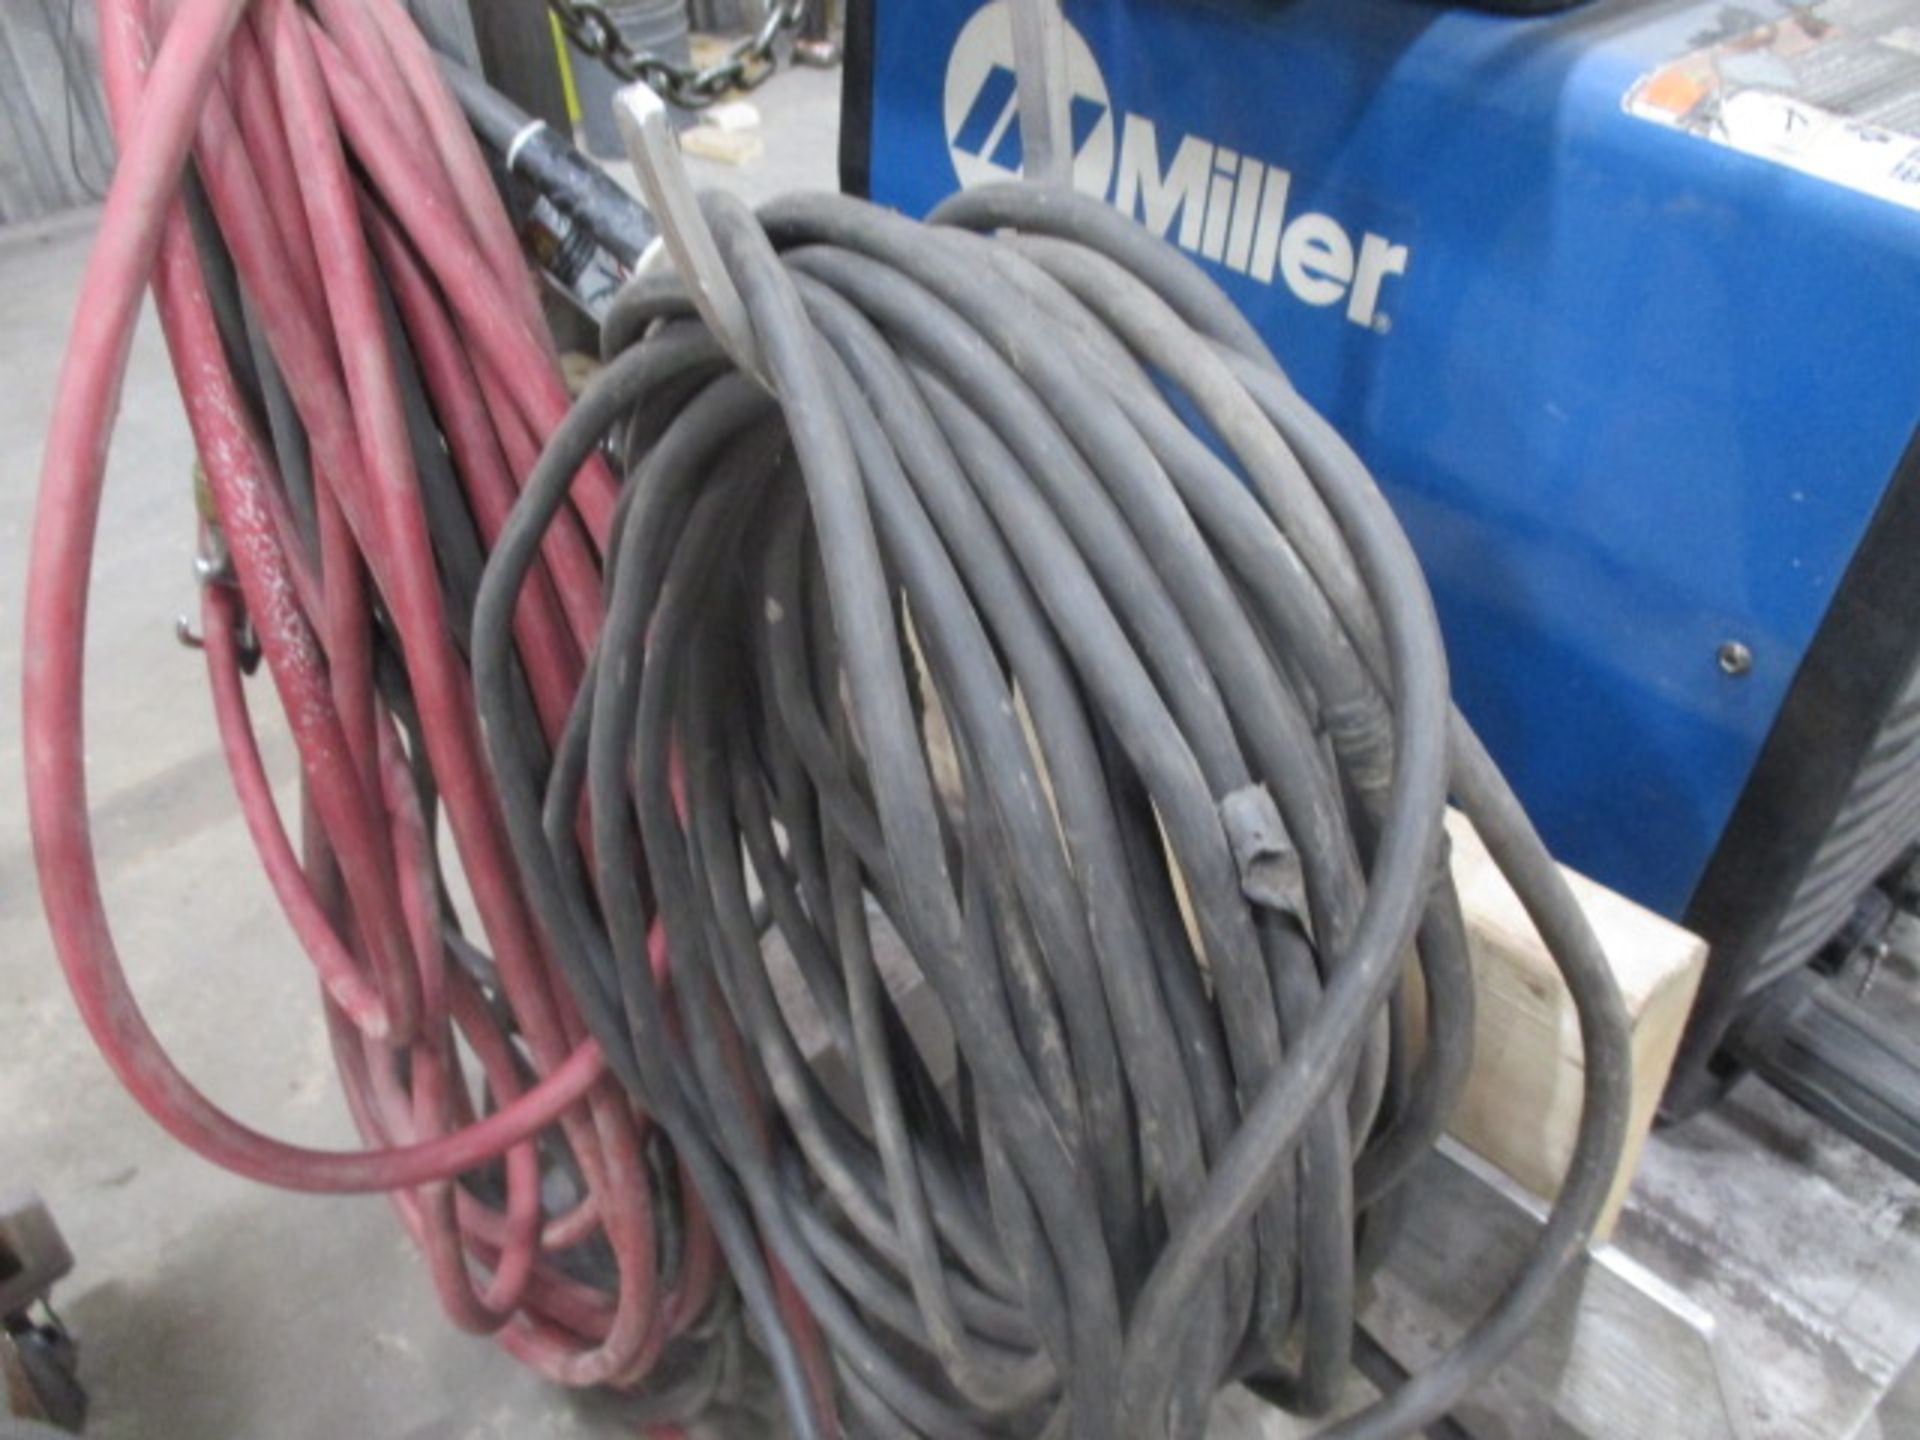 Miller CST280 Stick Welder on Mobile Stand - Image 3 of 5